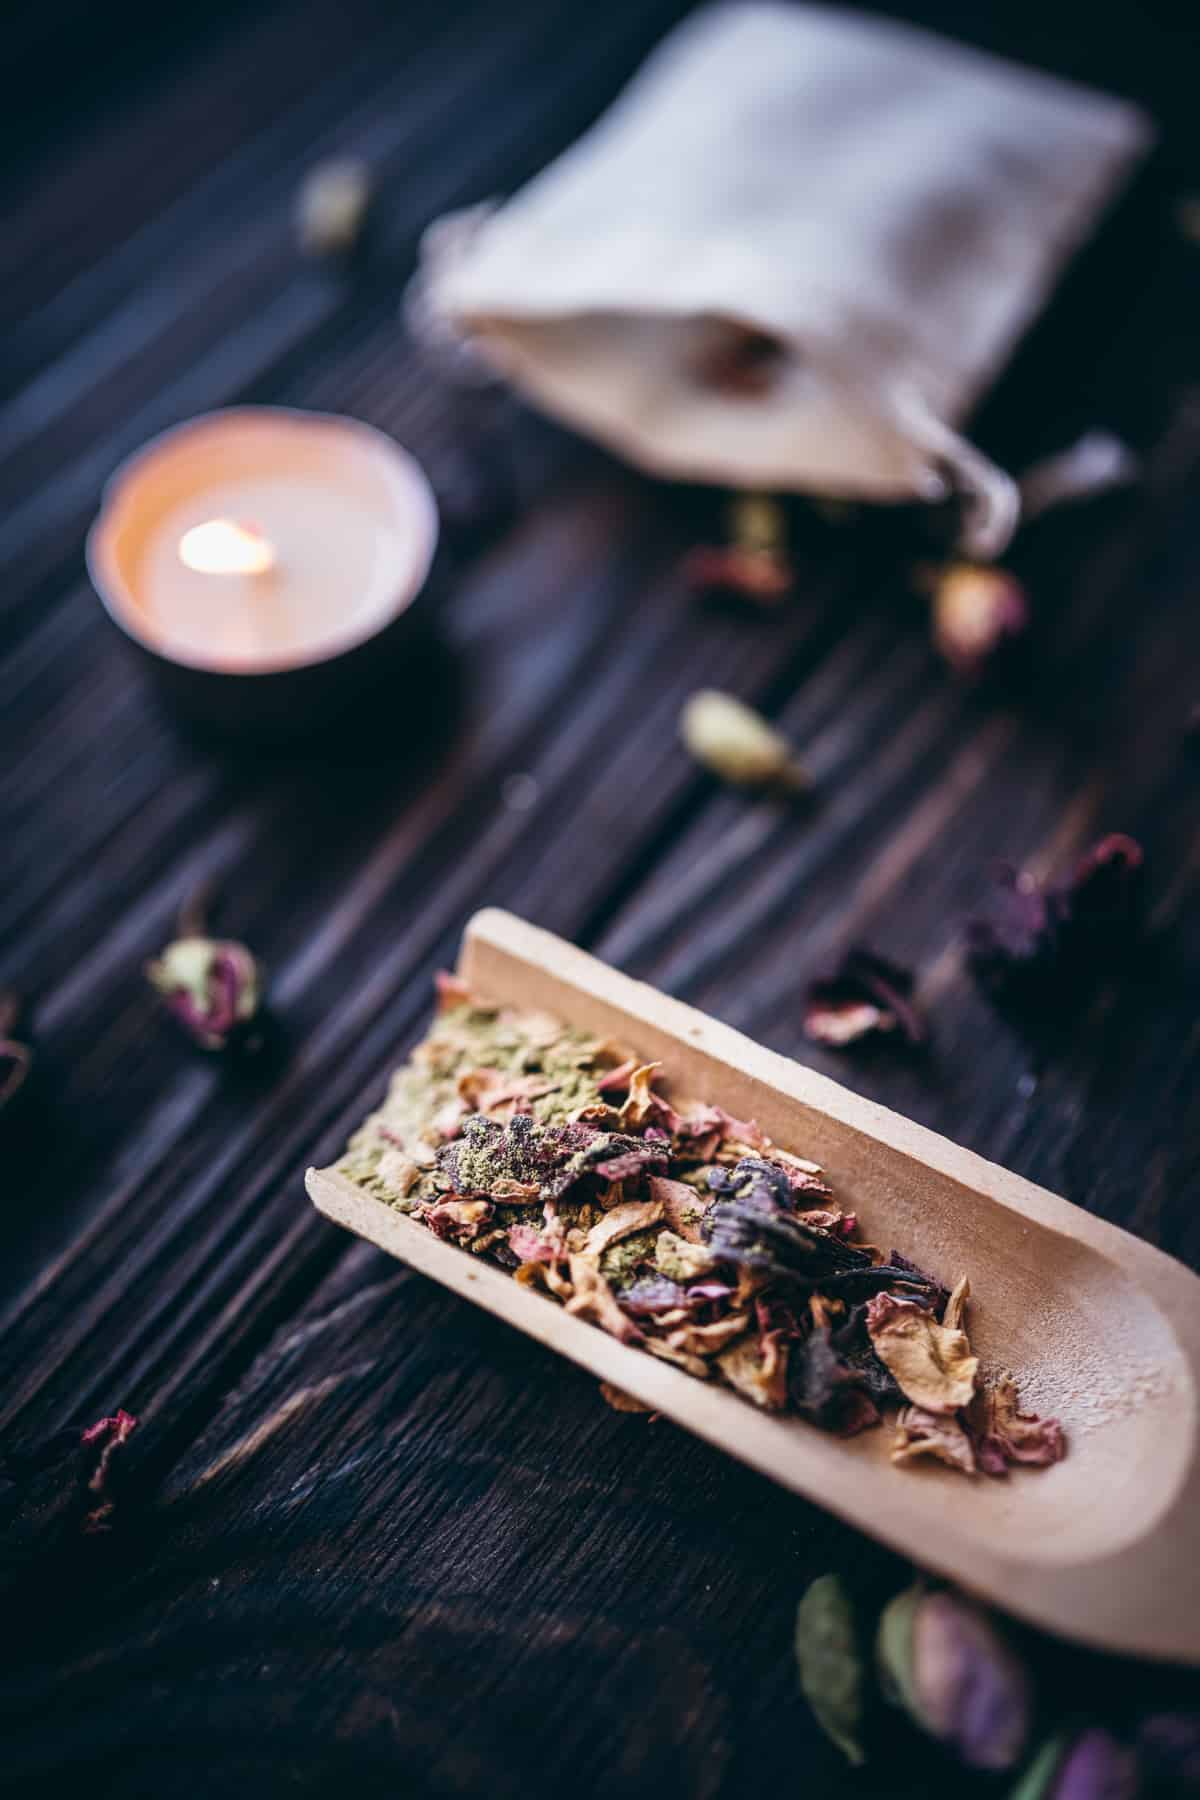 A wooden spoon filled with dried herbs and flowers resting on a dark table next to a lit candle.